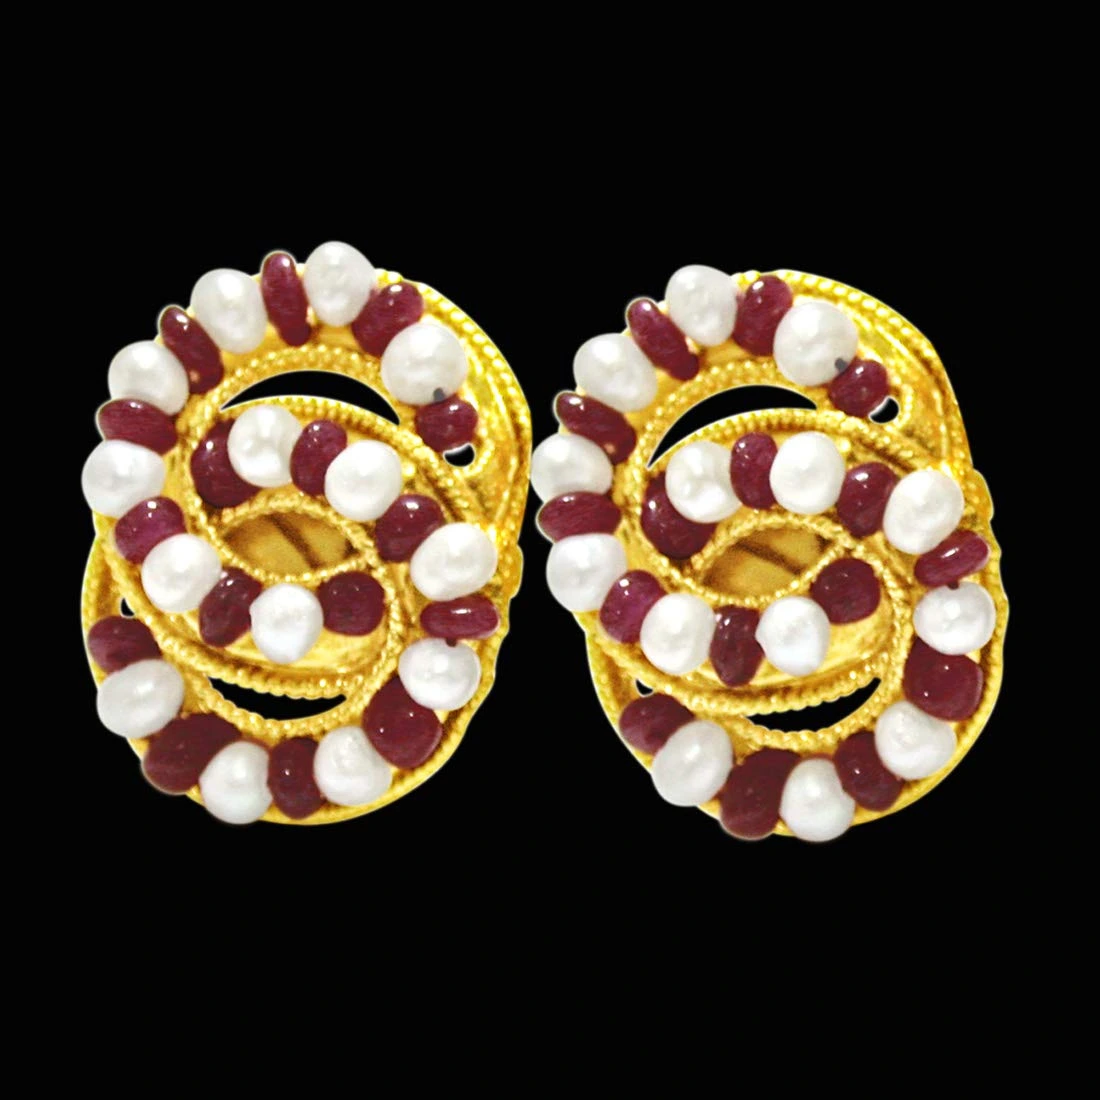 Stylish Sensation - Real Red Ruby Beads, Freshwater Pearls & Gold Plated Earrings for Women (SE77)